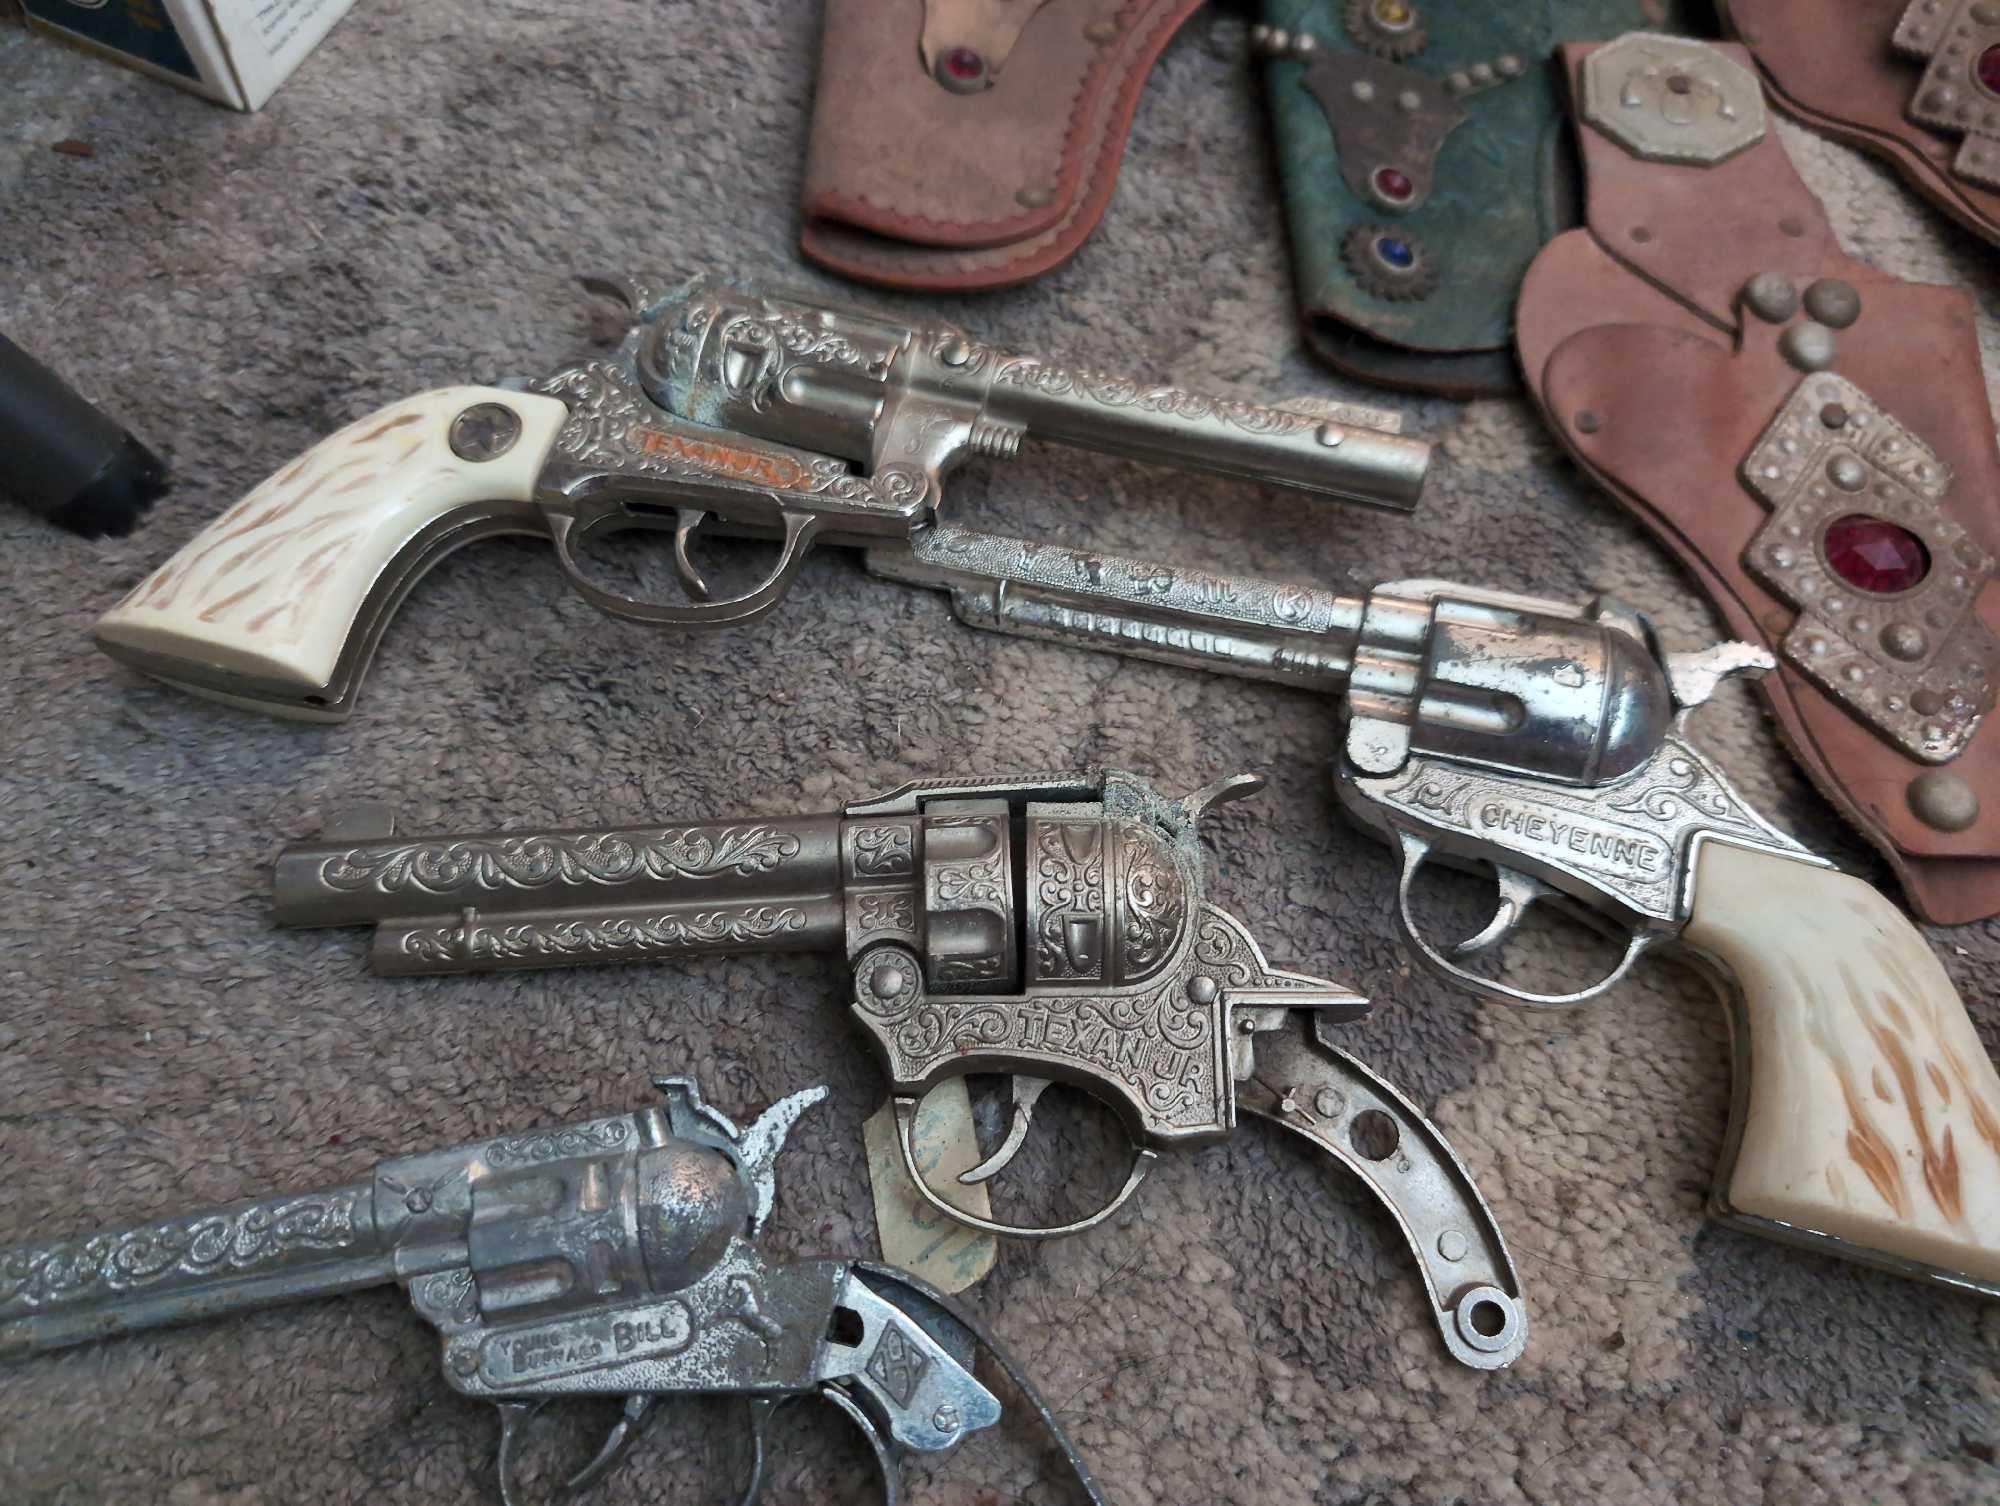 (LR) (3) BAGS FULL OF VINTAGE COWBOY CAP GUN REVOLVERS, HOLSTERS, & SPURS. BRAND NAMES INCLUDE